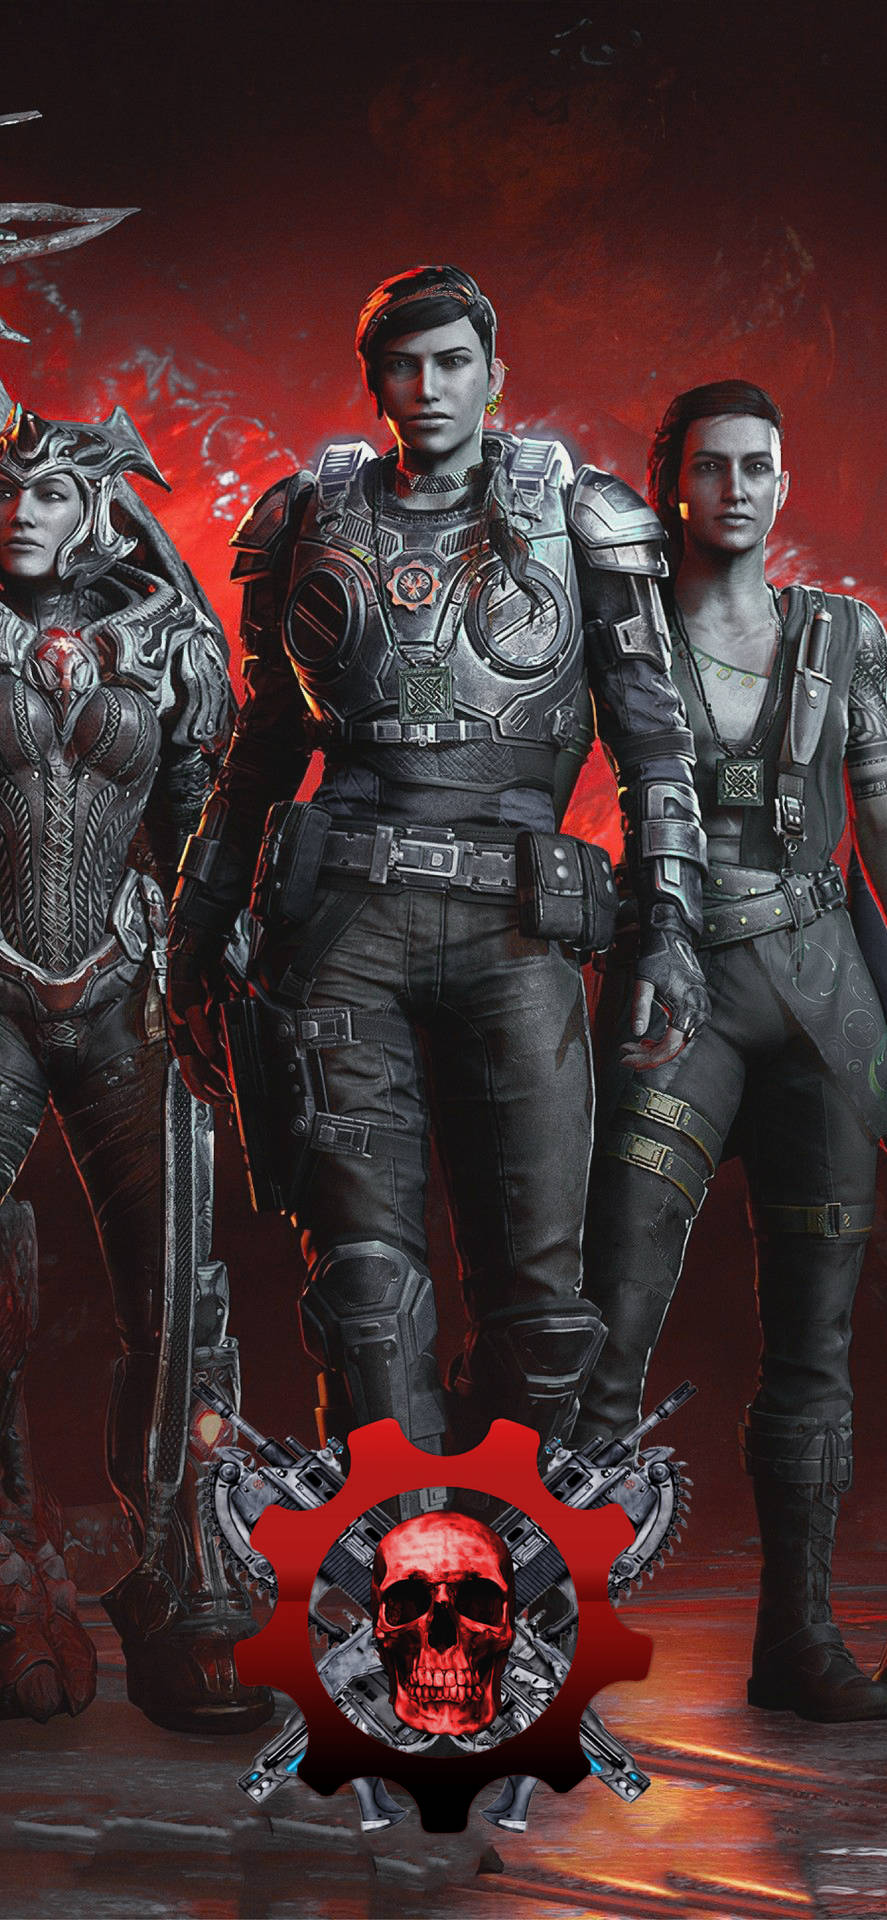 Kait With Female Warriors Gears 5 Iphone